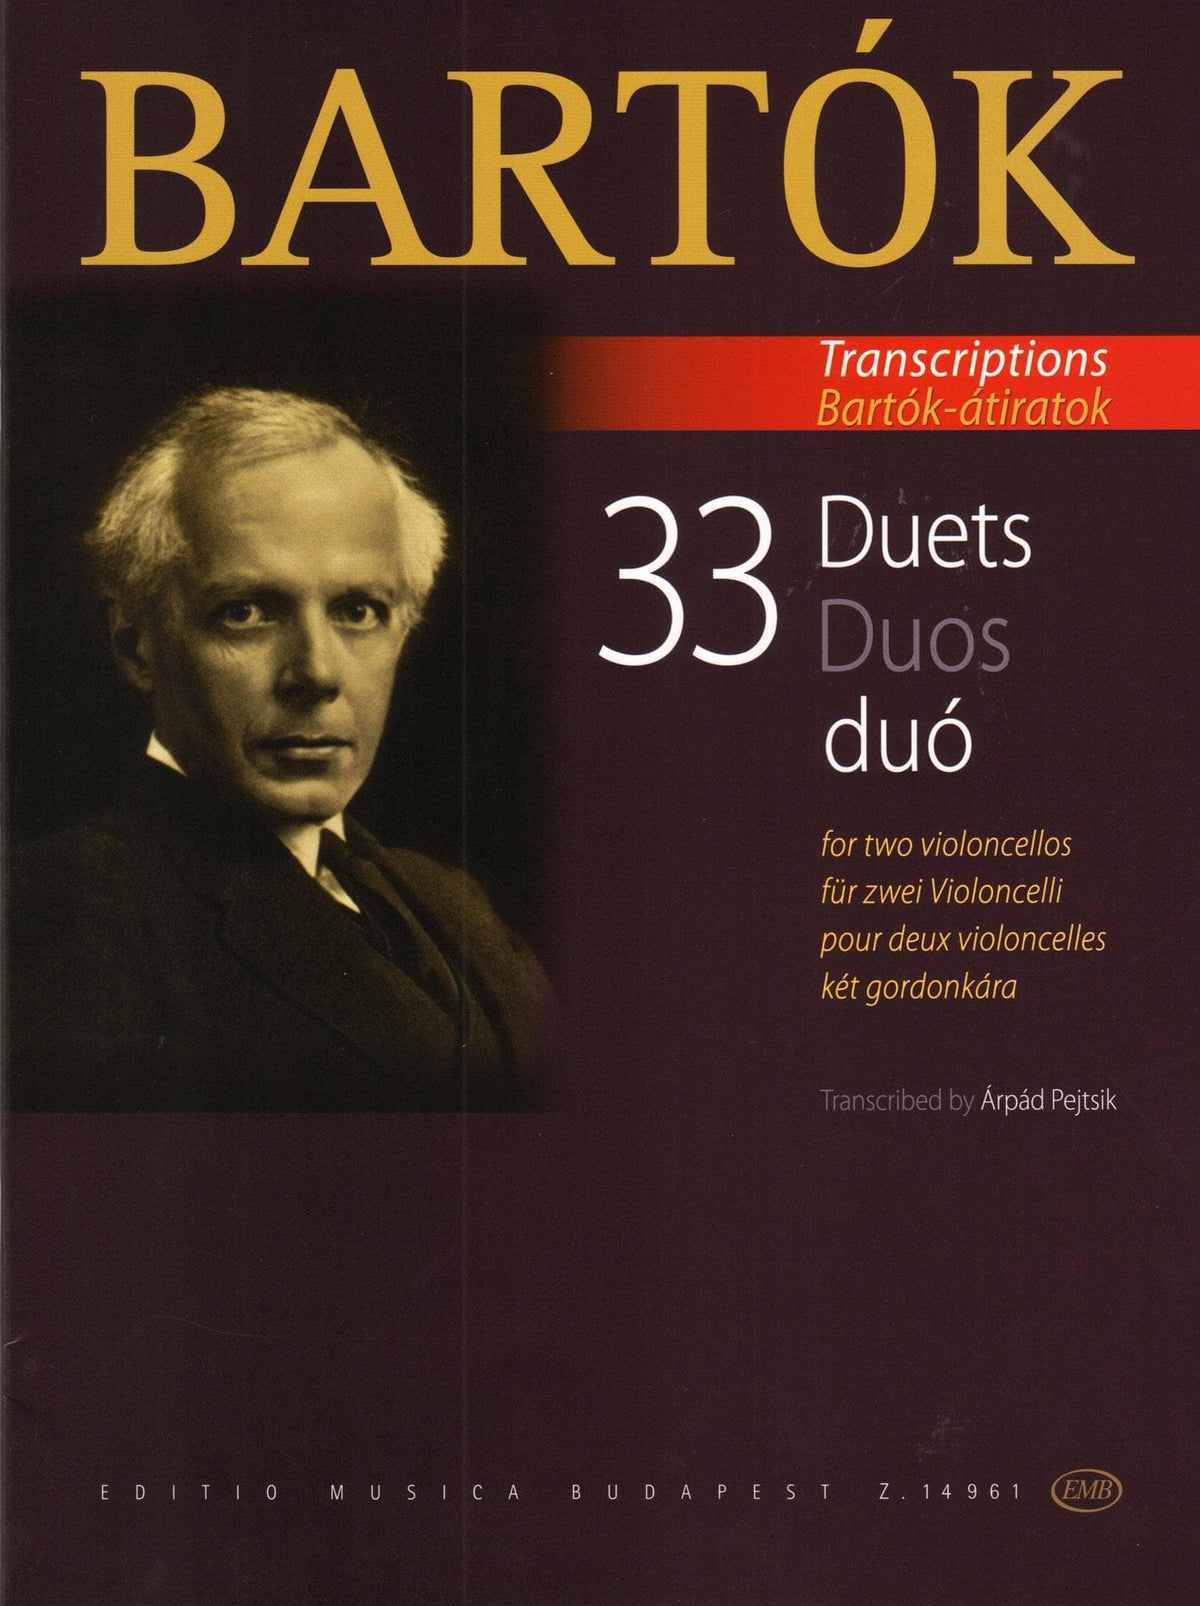 Bartók, Béla - 33 Duets - Transcribed by Árpád Pejtsik - for Two Cellos - Editio Musica Budapest